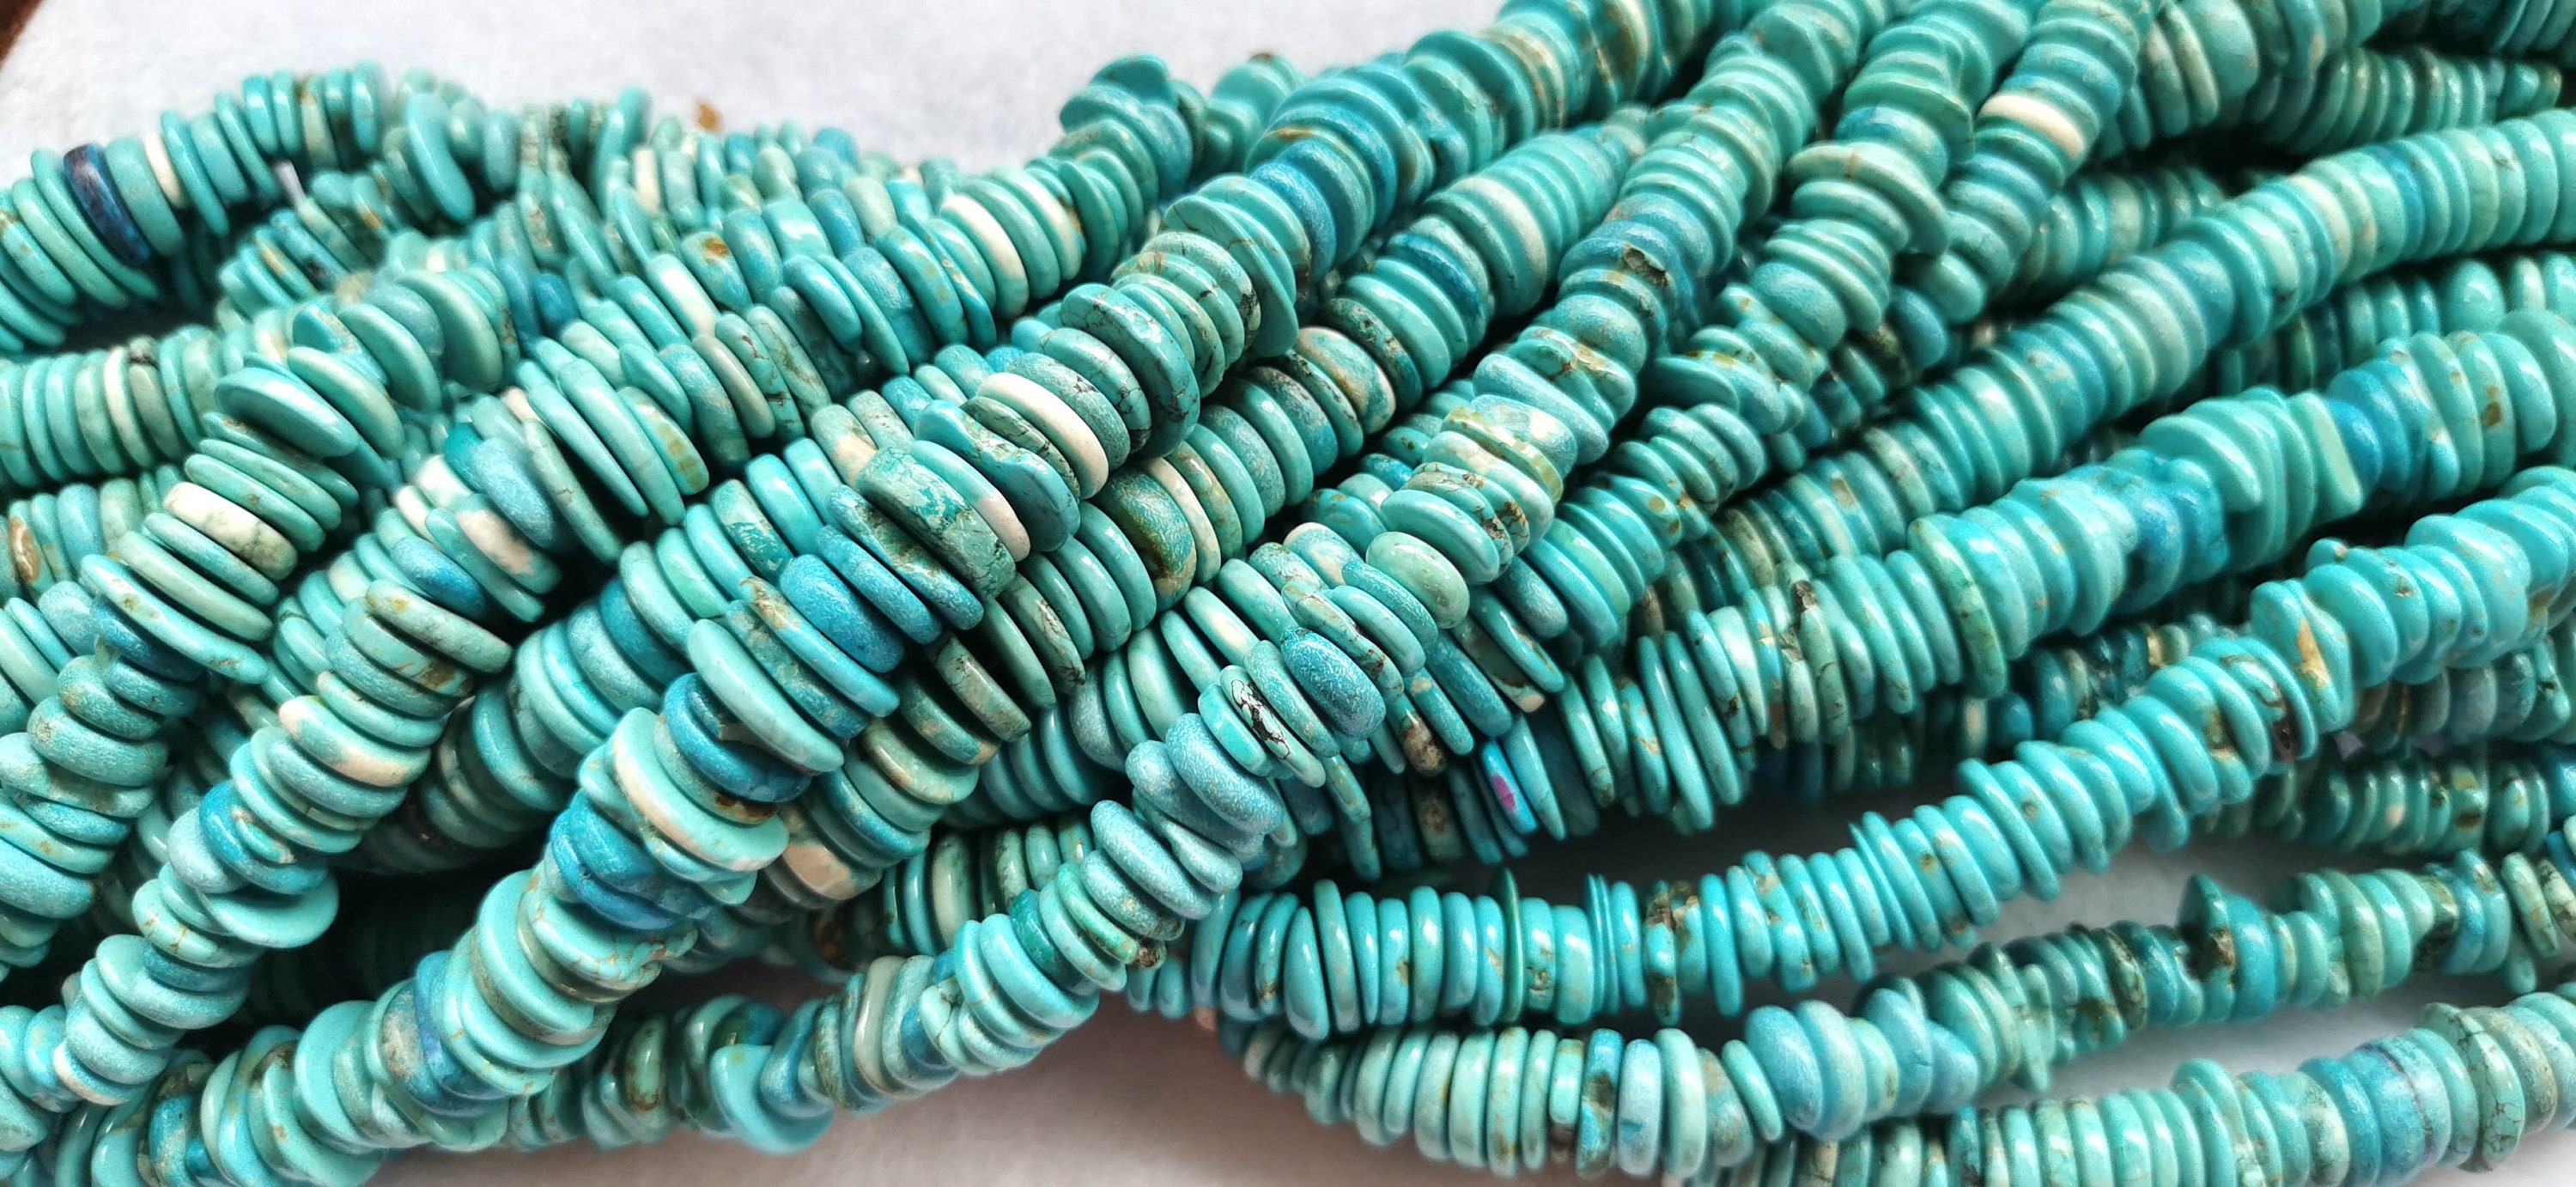 RARE Number 8 Turquoise Heishi Beads 7mm (package of 12 beads)